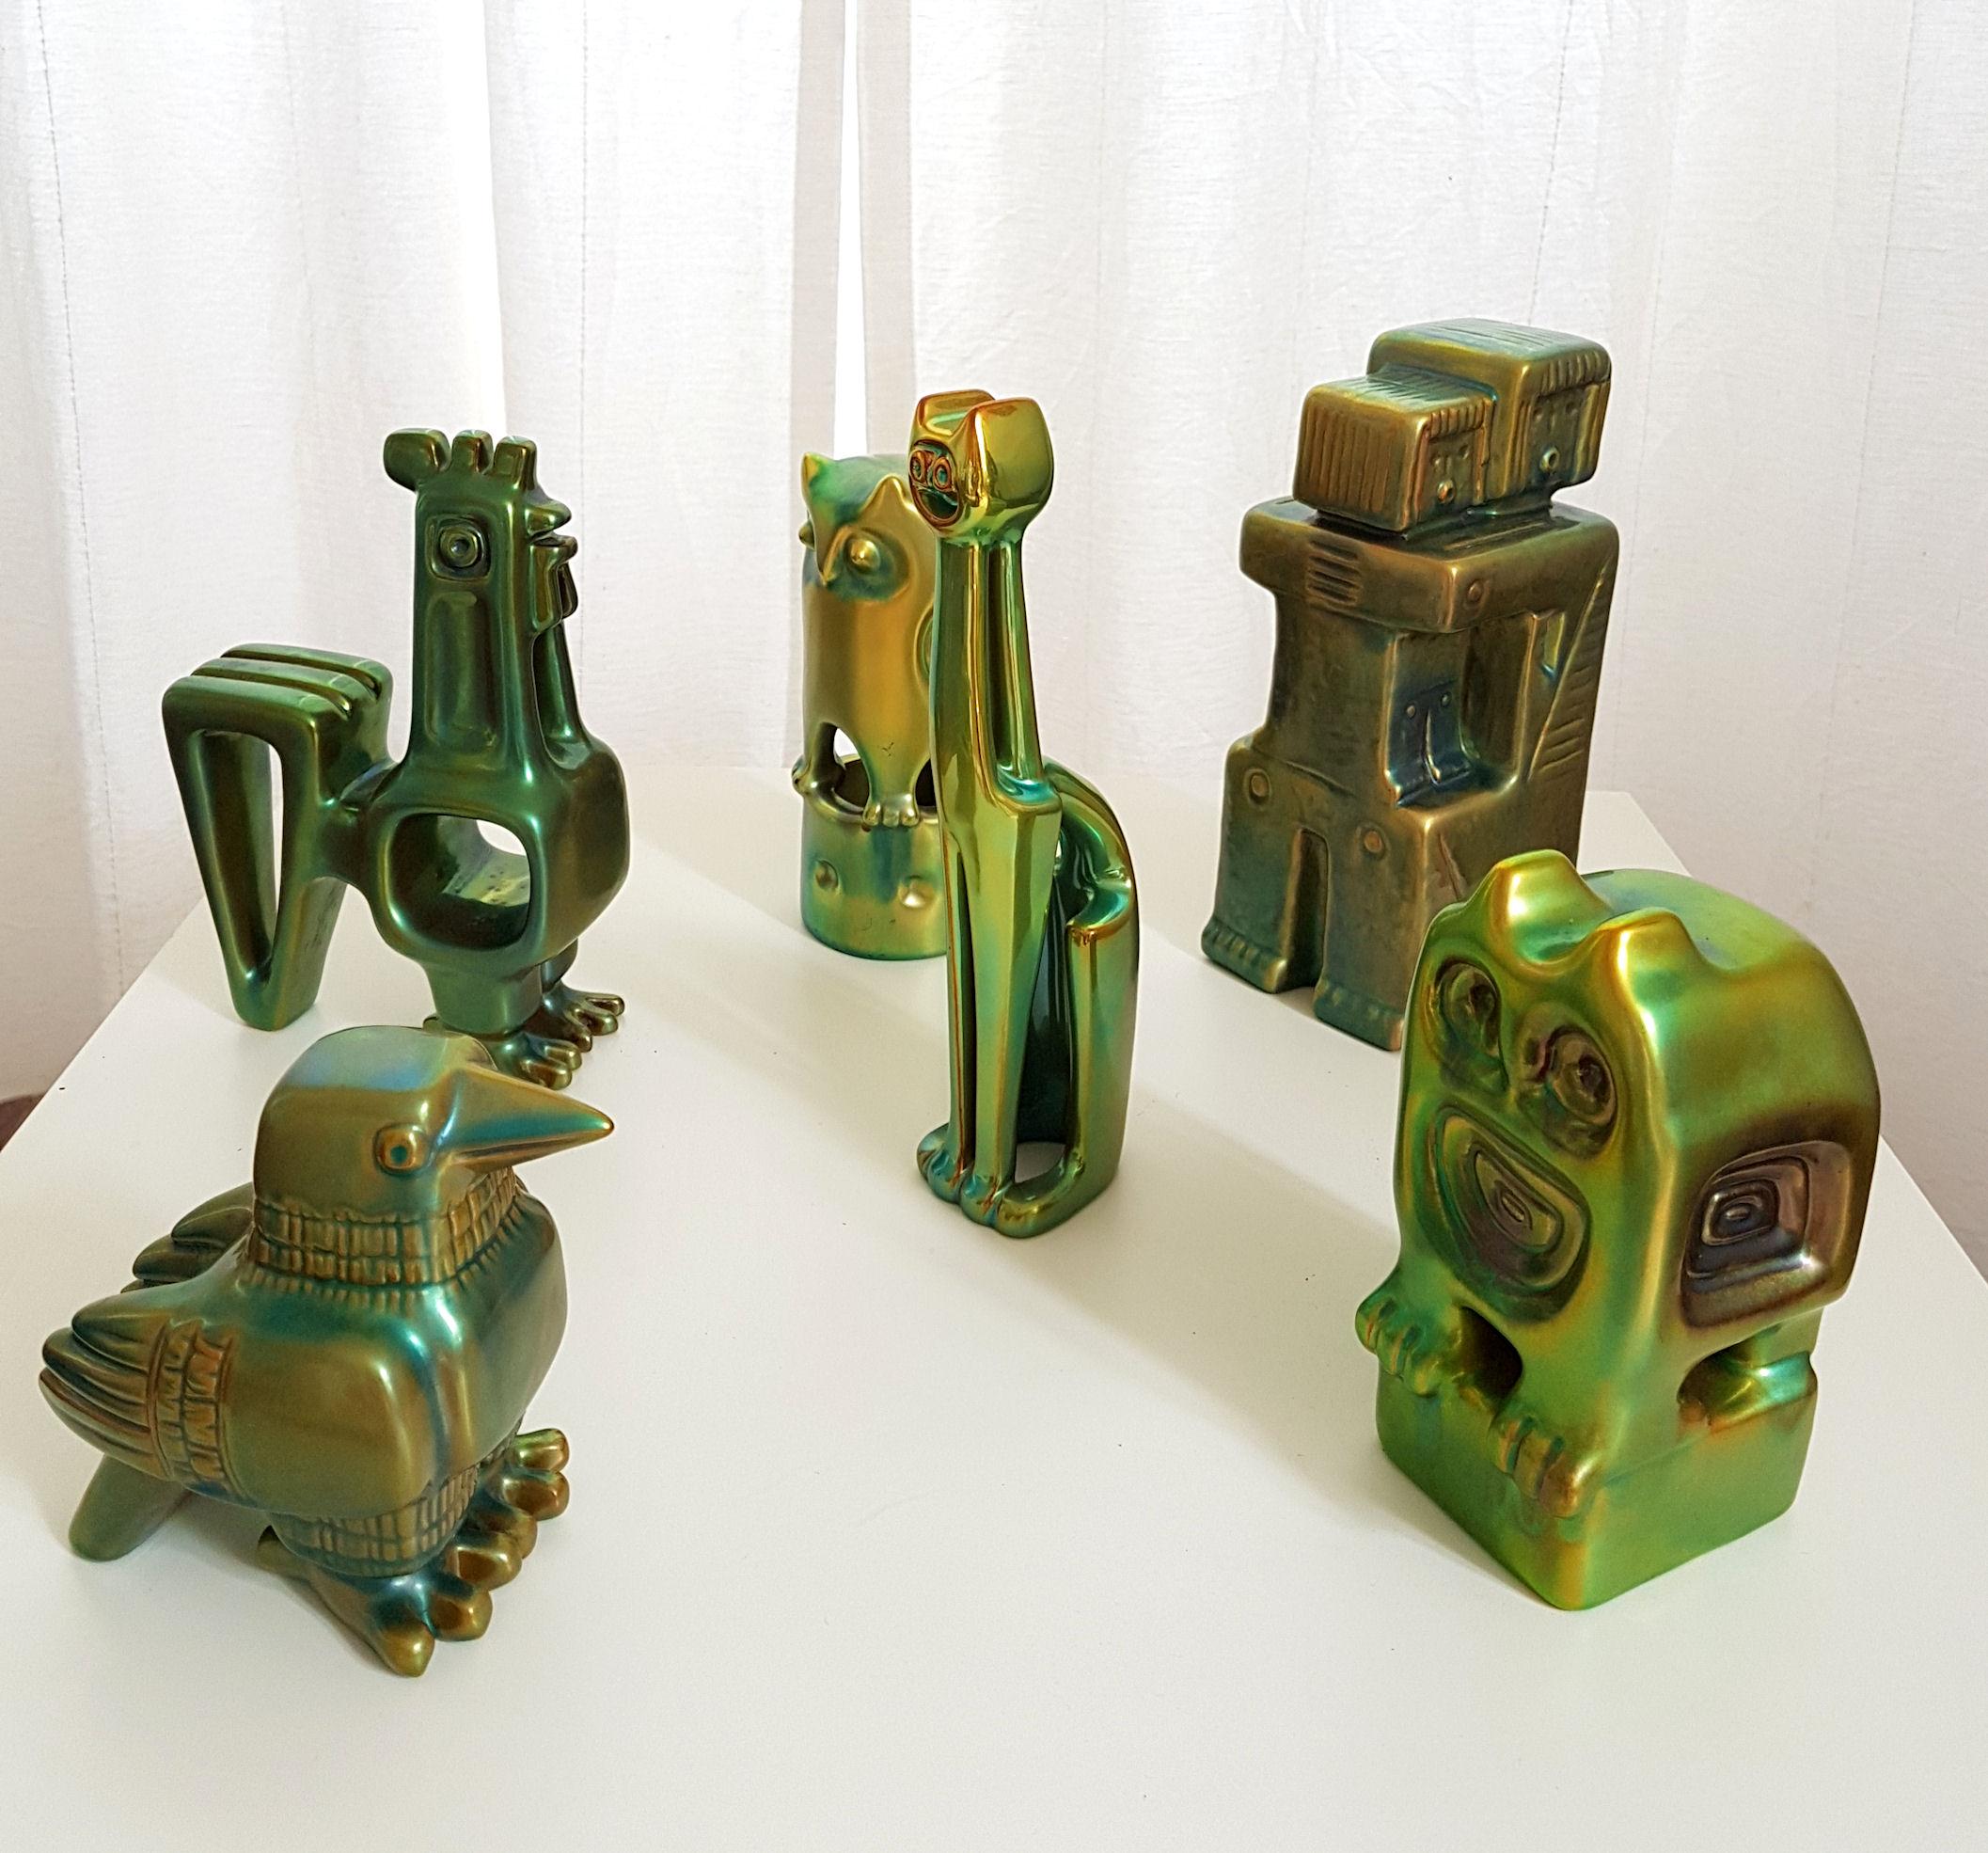 Set of six Mid Century Modern green eosin ceramic figurines, or sculptures by Zsolnay, Hungary.
Artist's Cubic period, with 1960s stamps under each piece.
Each in excellent condition.
Rooster: 7.87 x 5.12 in.
Cat: 9 x 2.75 in.
Mother and child: 9 x